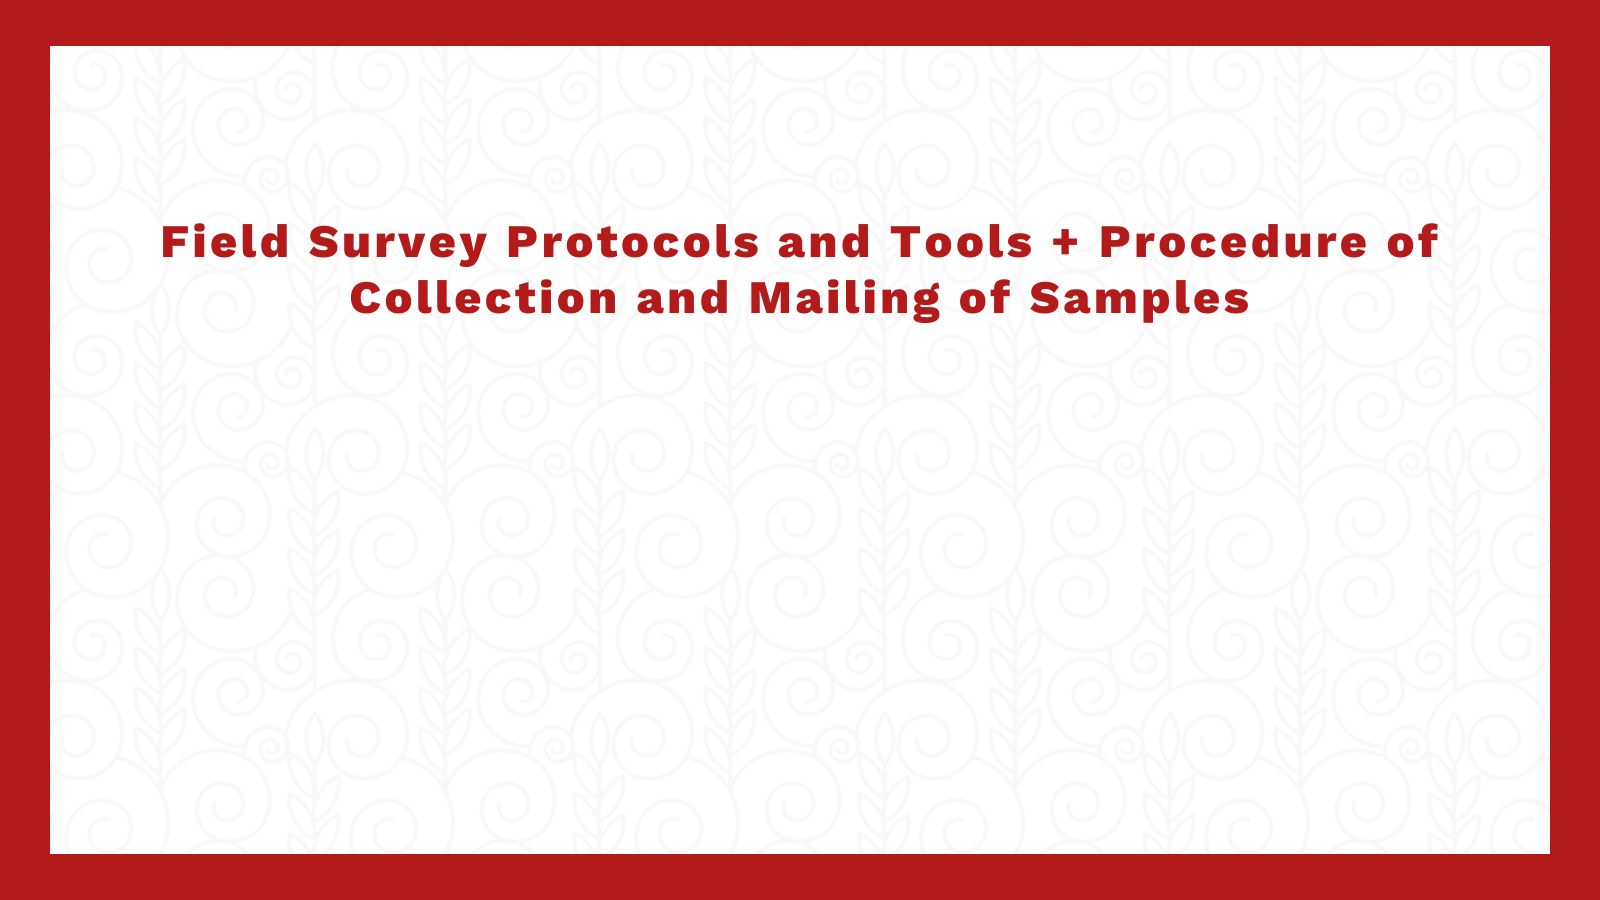 Field Survey Protocols and Tools + Procedure of Collection and Mailing of Samples